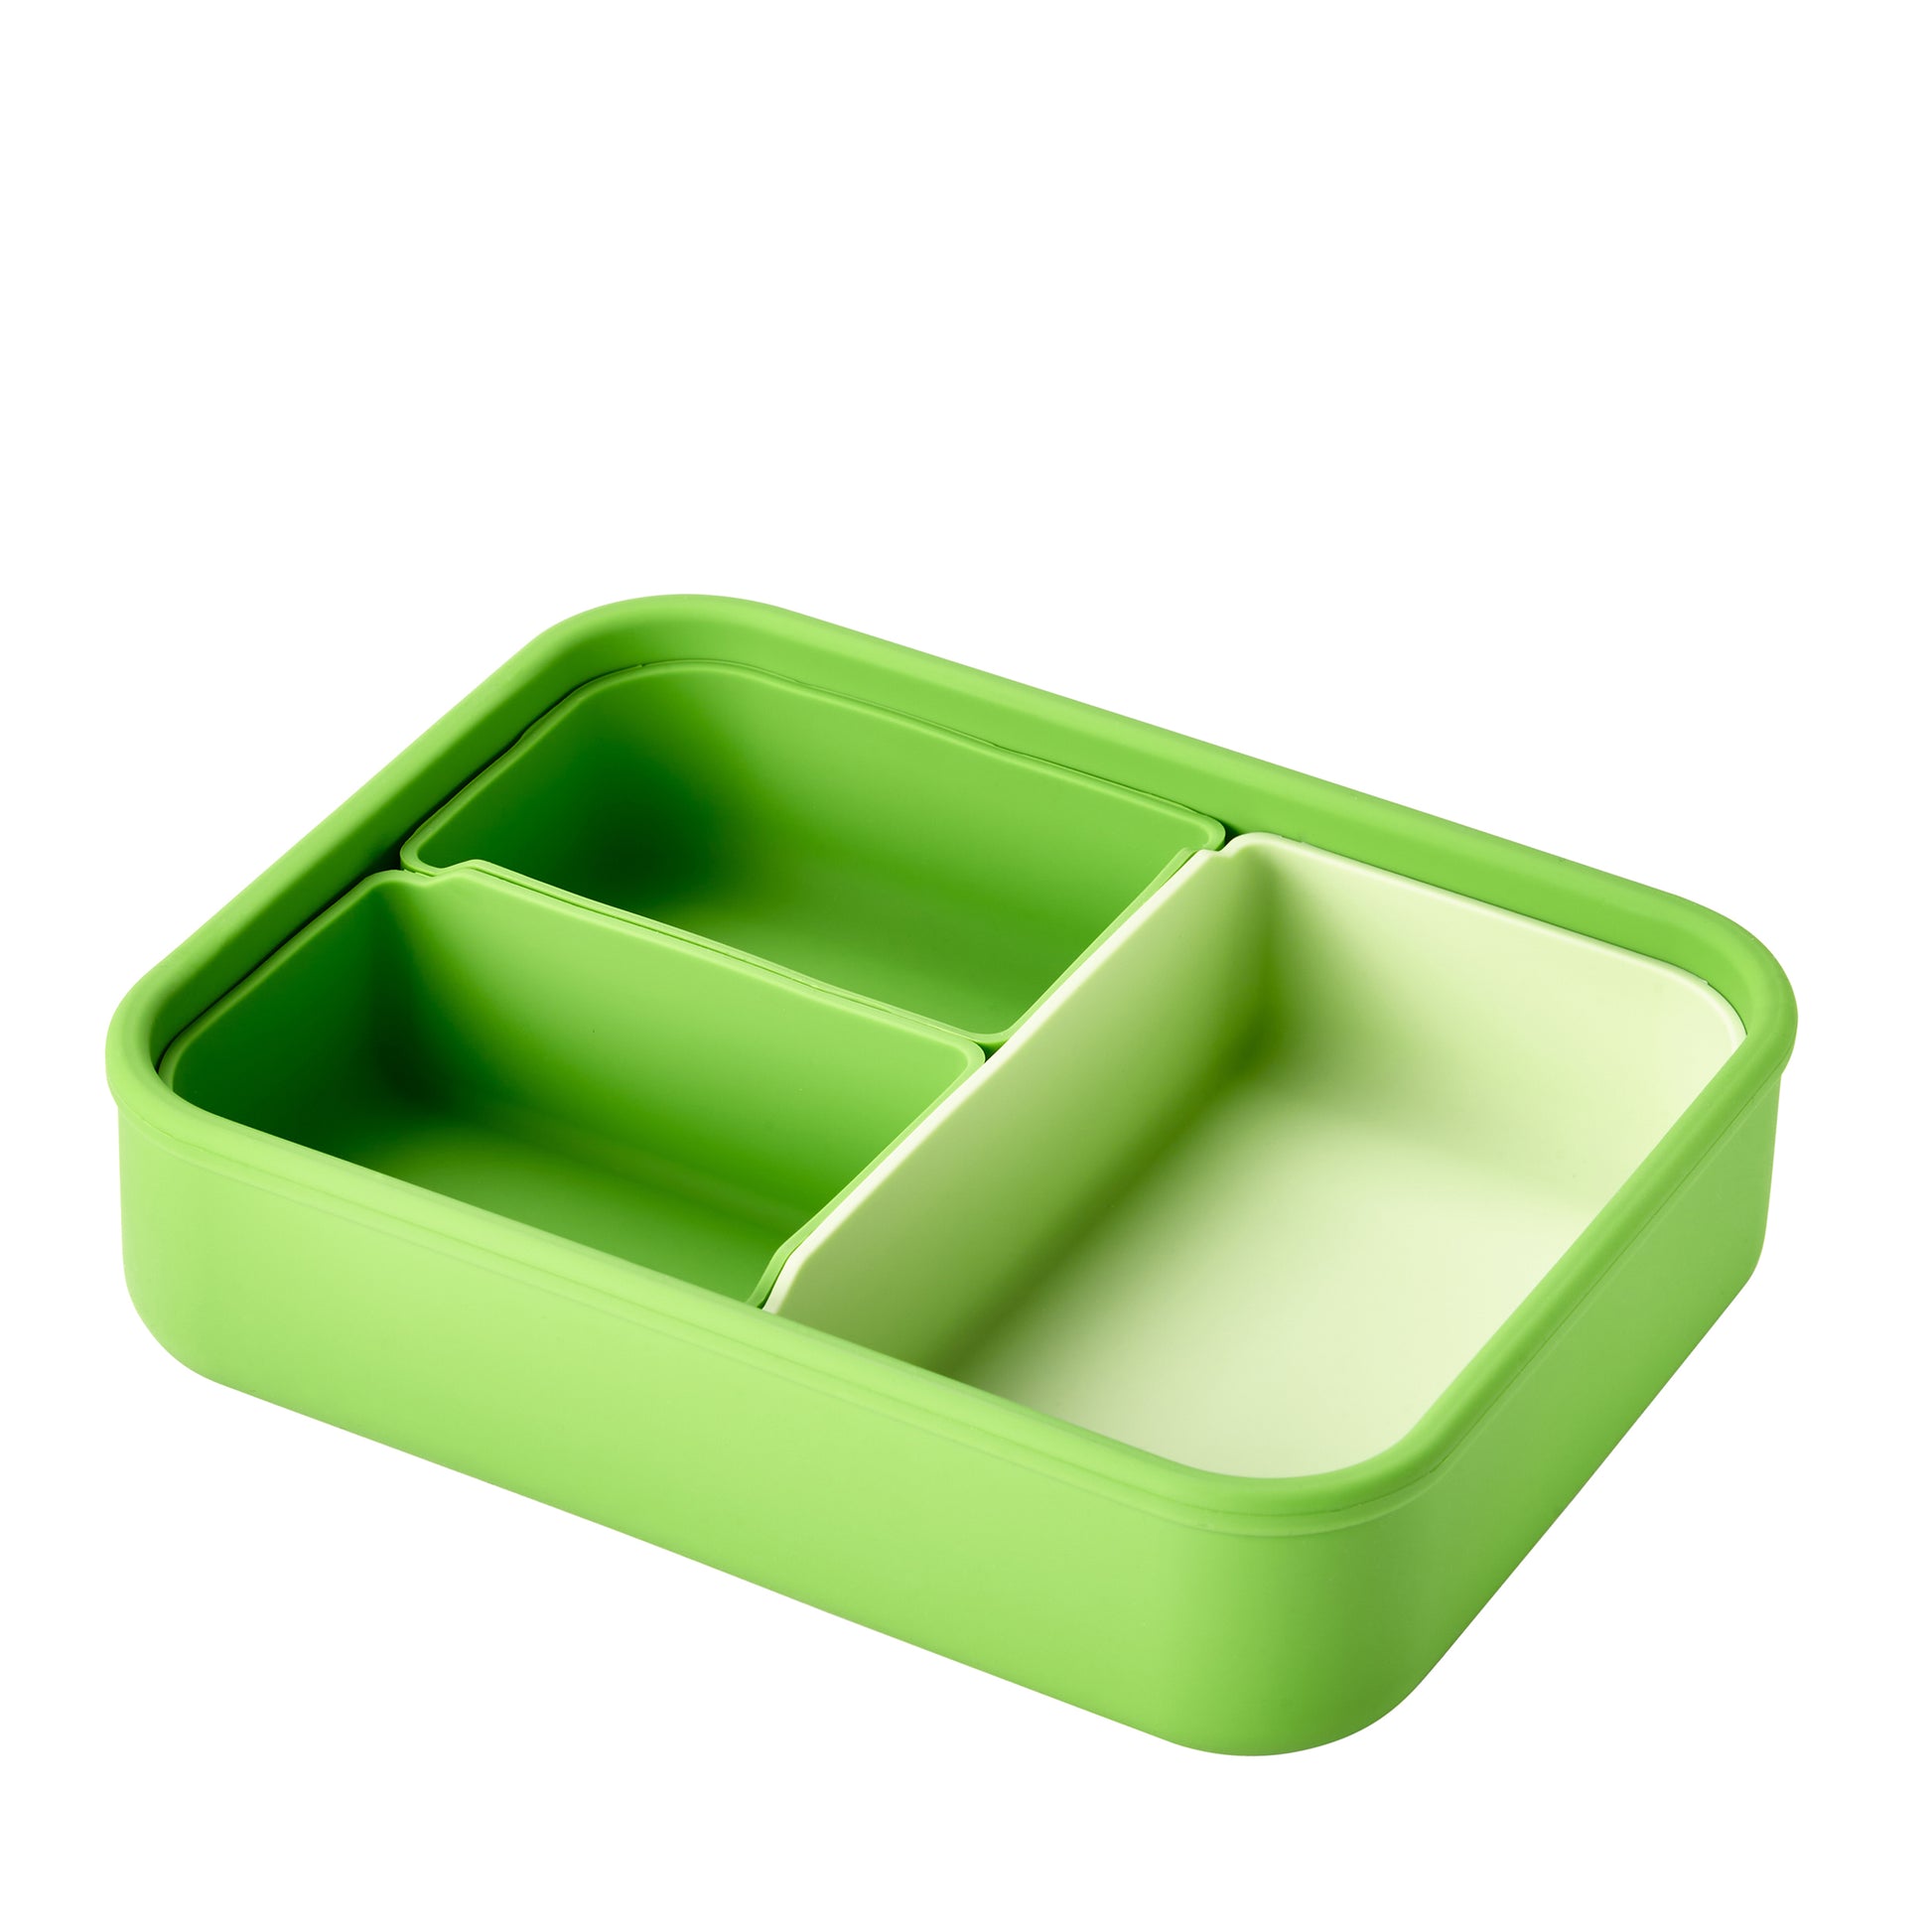 Premium Bento Box - Lunch Box is Leakproof, Multi Removable Compartments.  Dishwasher and Microwave Safe Food Container with Built-in Removable Ice